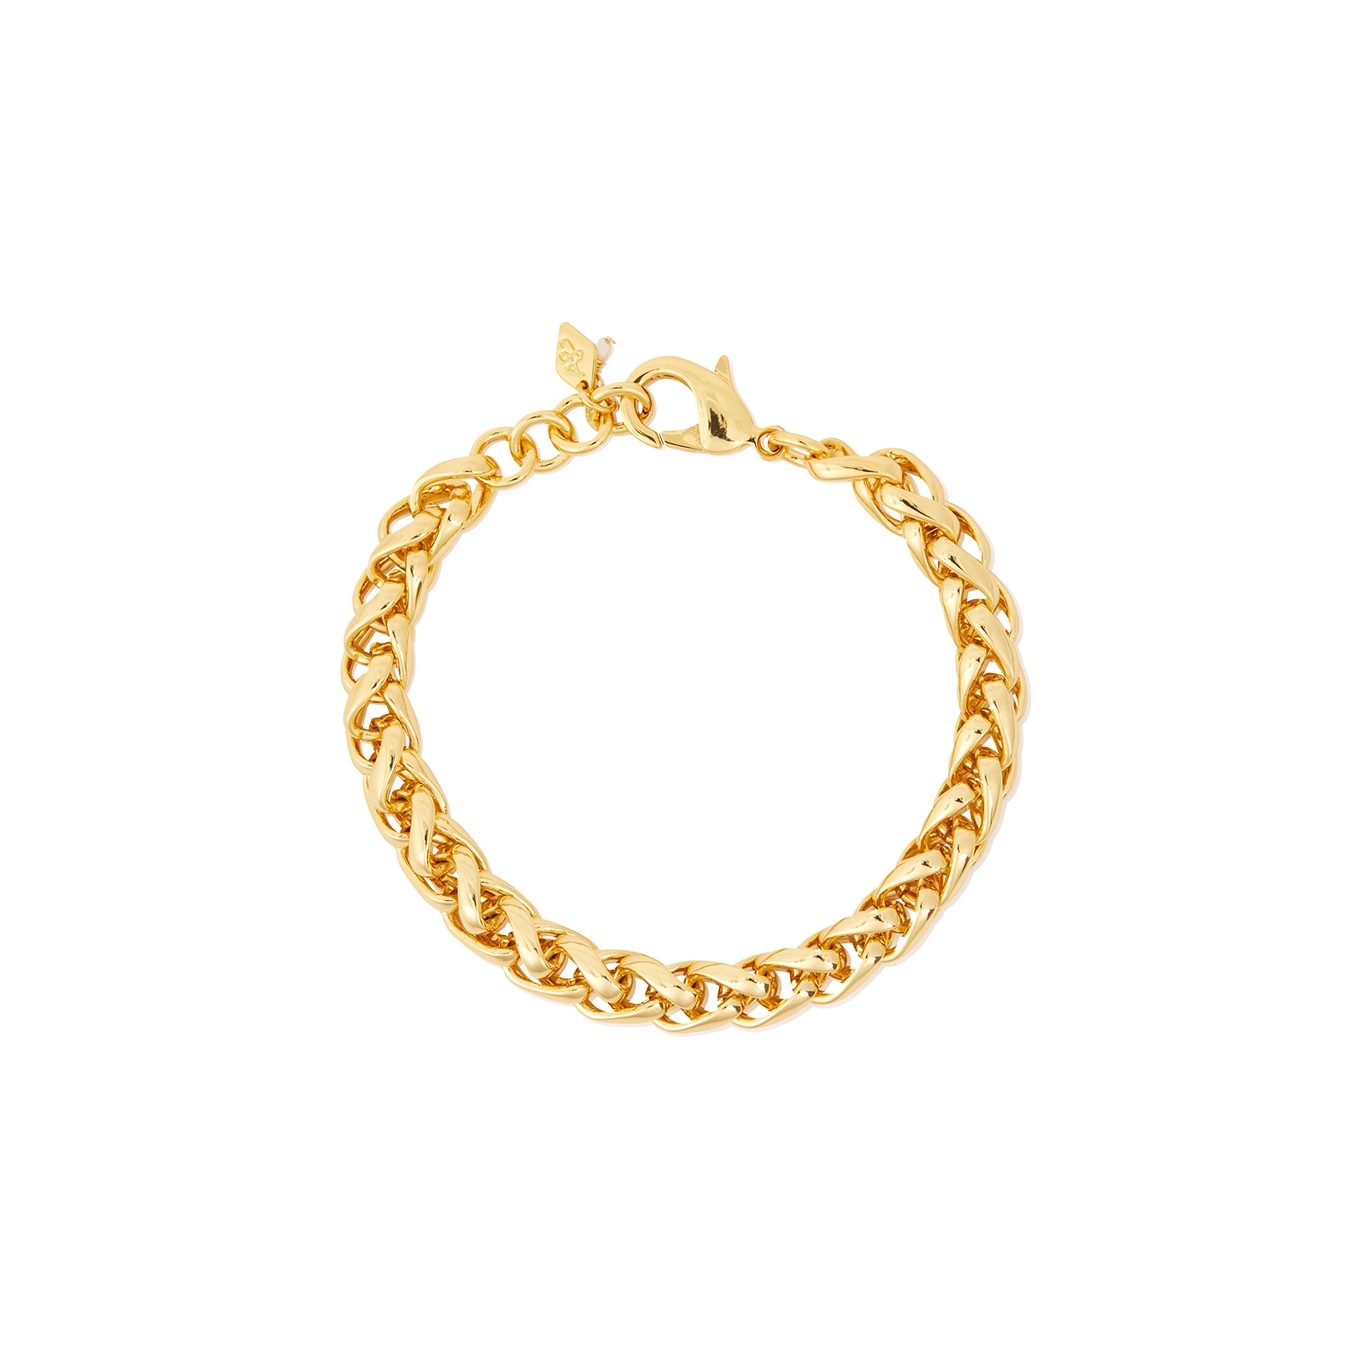 Anni LU Liquid Gold 18kt Gold-plated Chain Bracelet - One Size